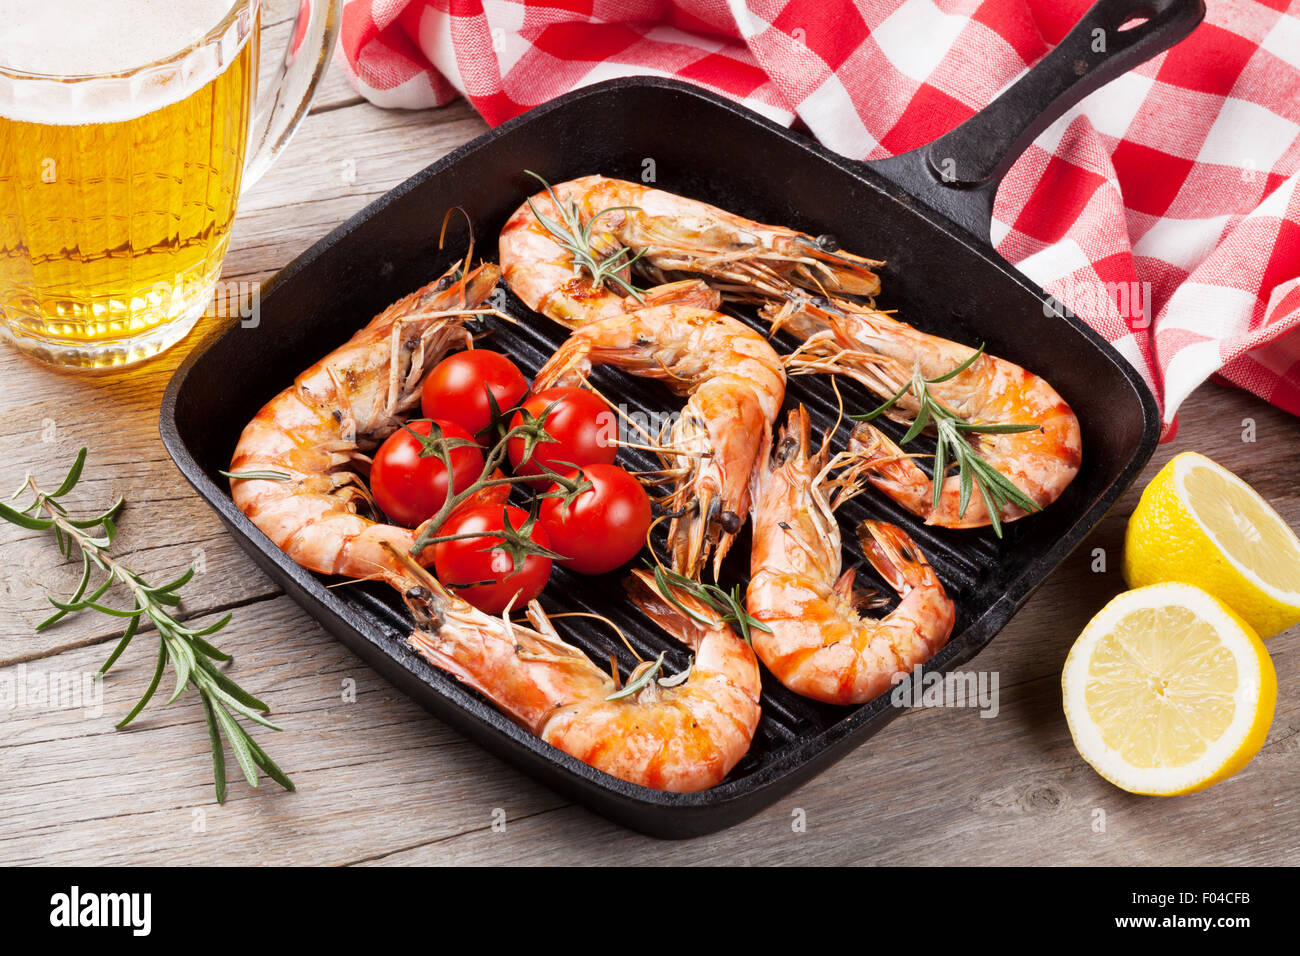 Grilled shrimps on frying pan and beer on wooden table Stock Photo